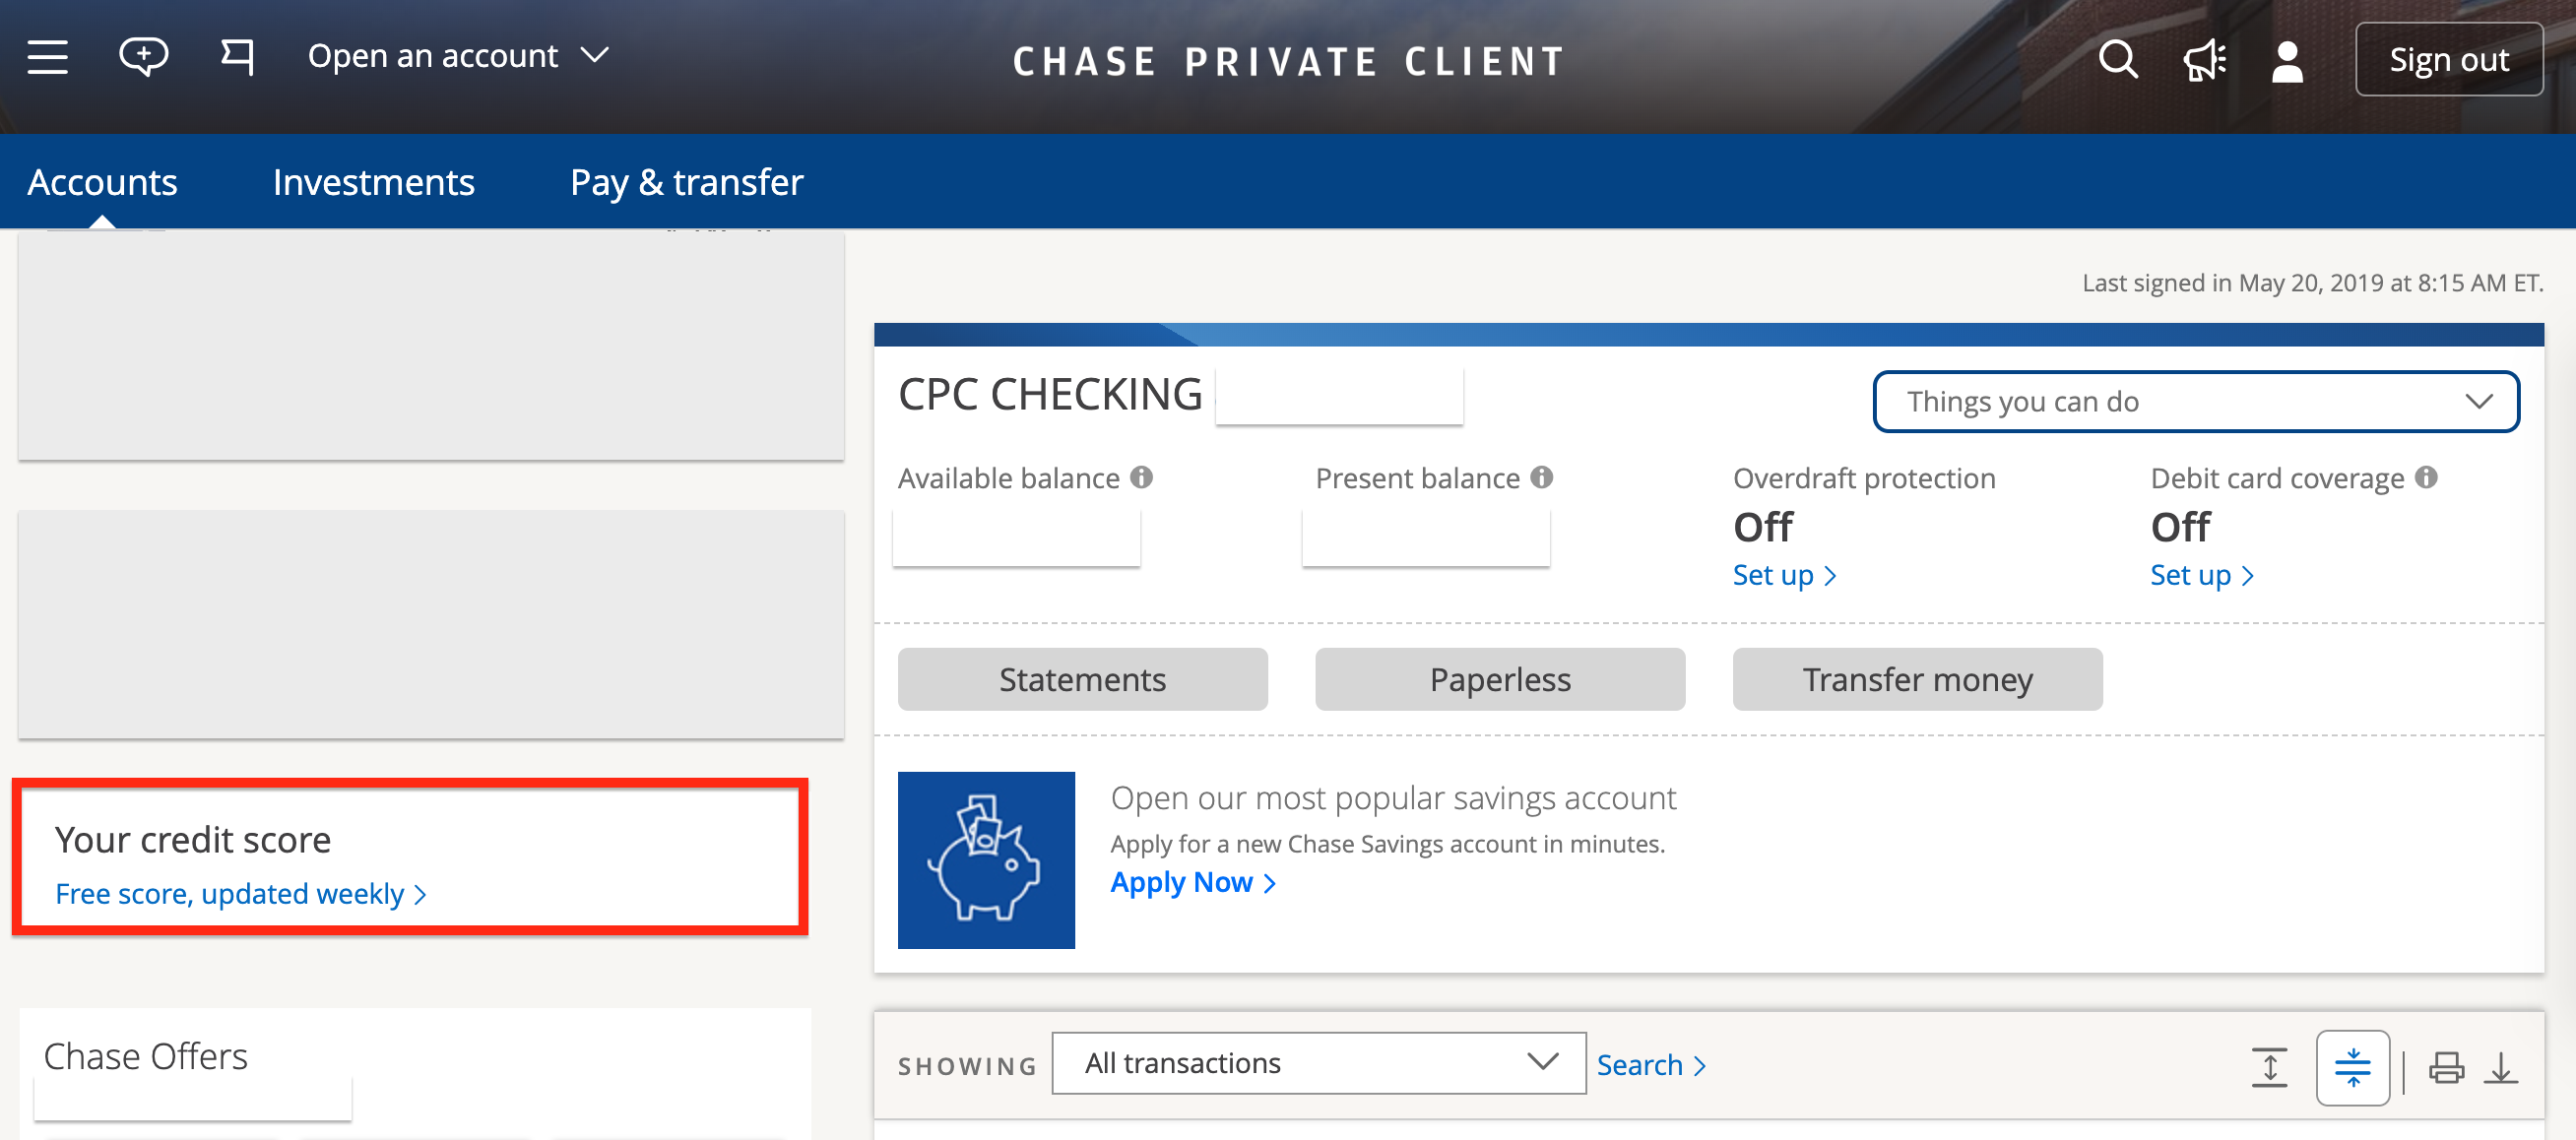 how to check my credit score with chase